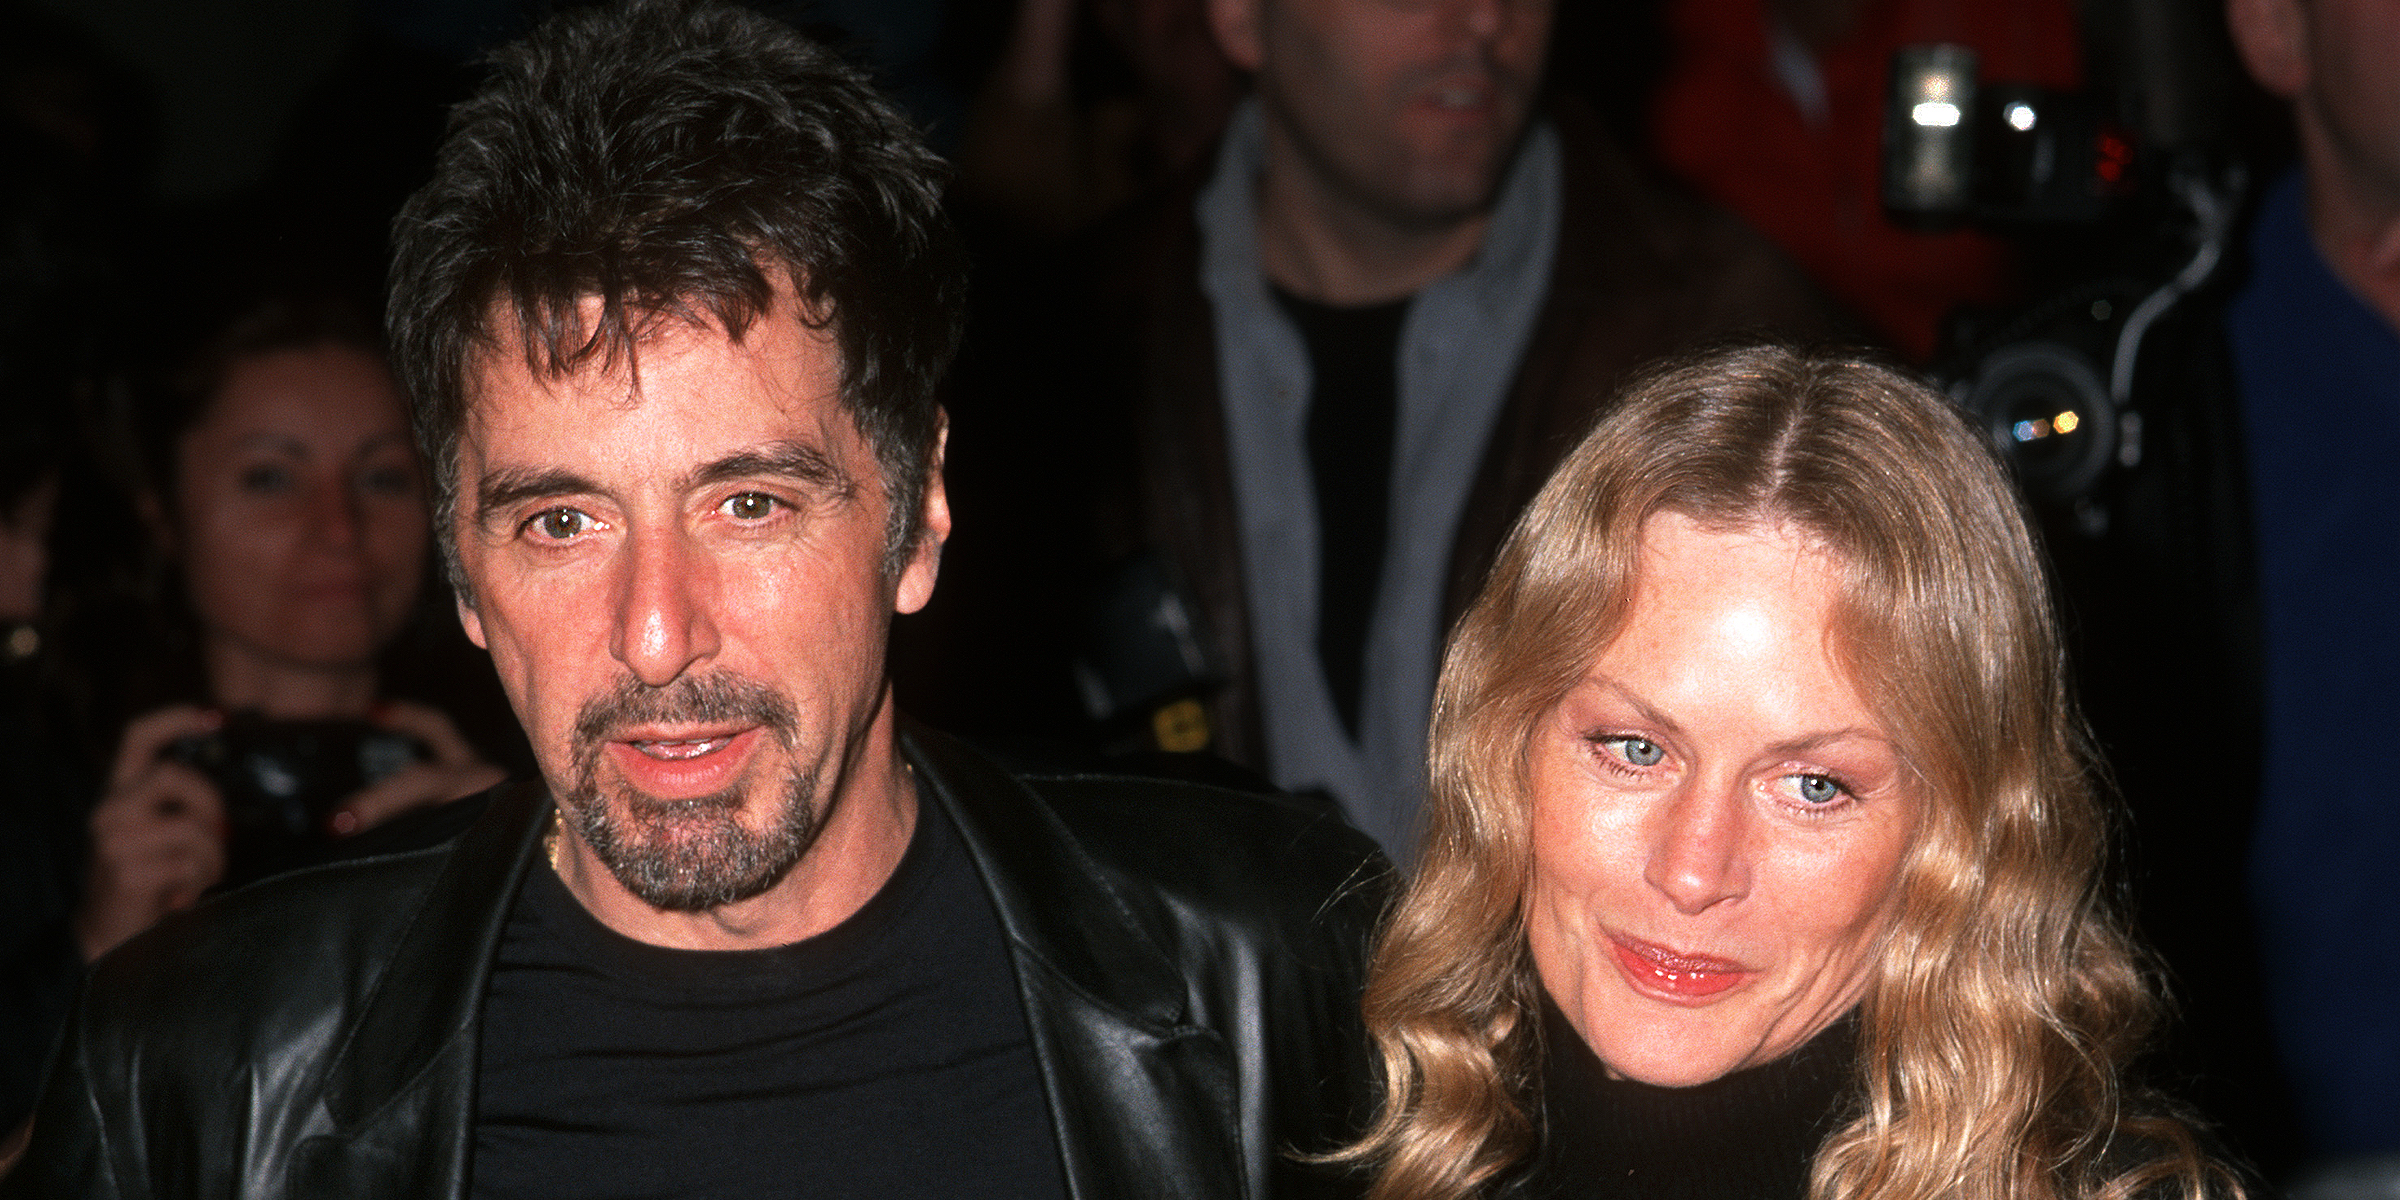 Al Pacino & Beverly D’Angelo’s Beautiful Twin Daughter, 23, Looks ‘So Much’ Like Mom in New Photo